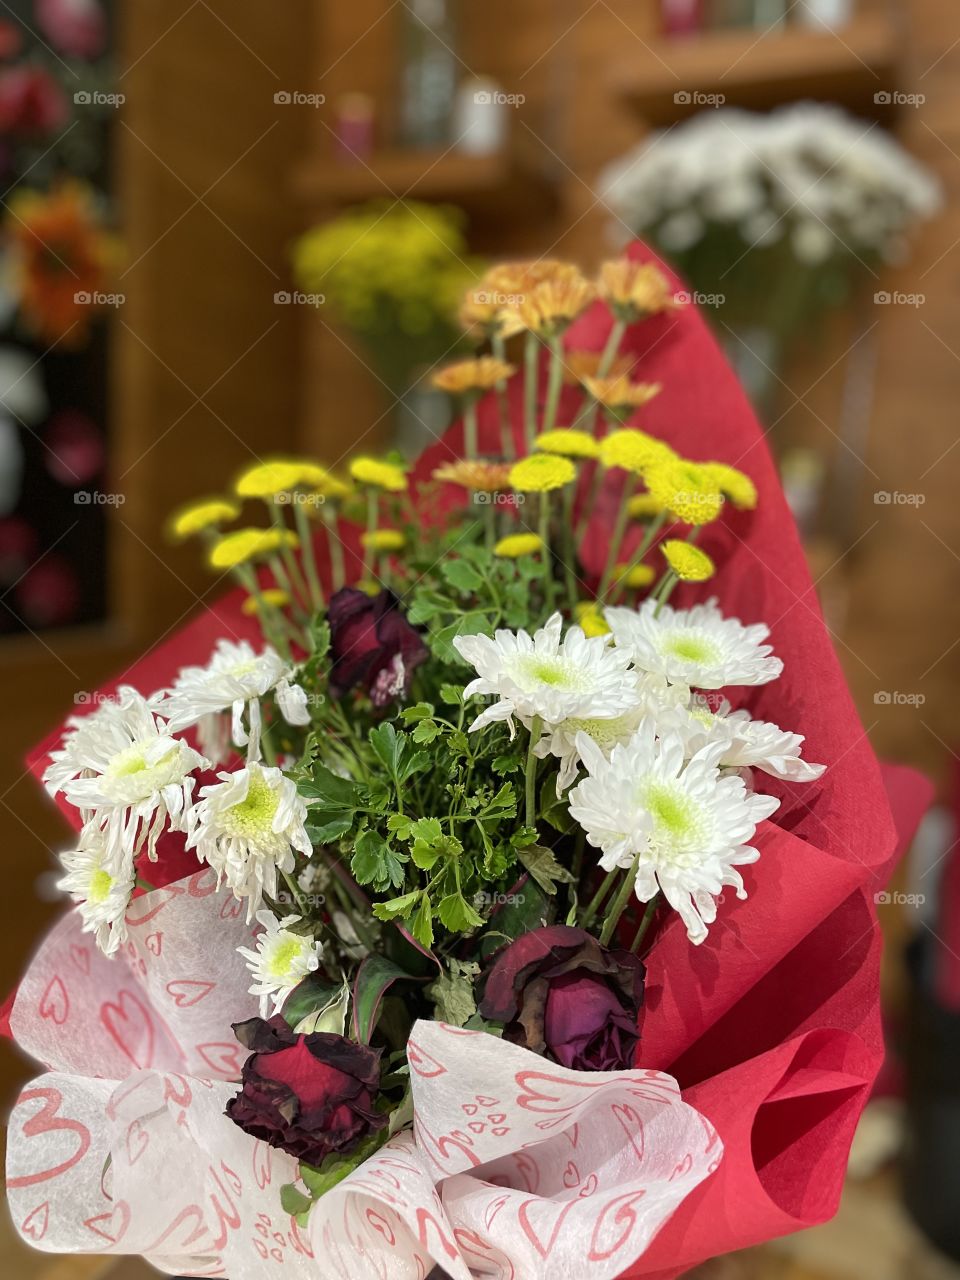 Bouquet of daisies and roses